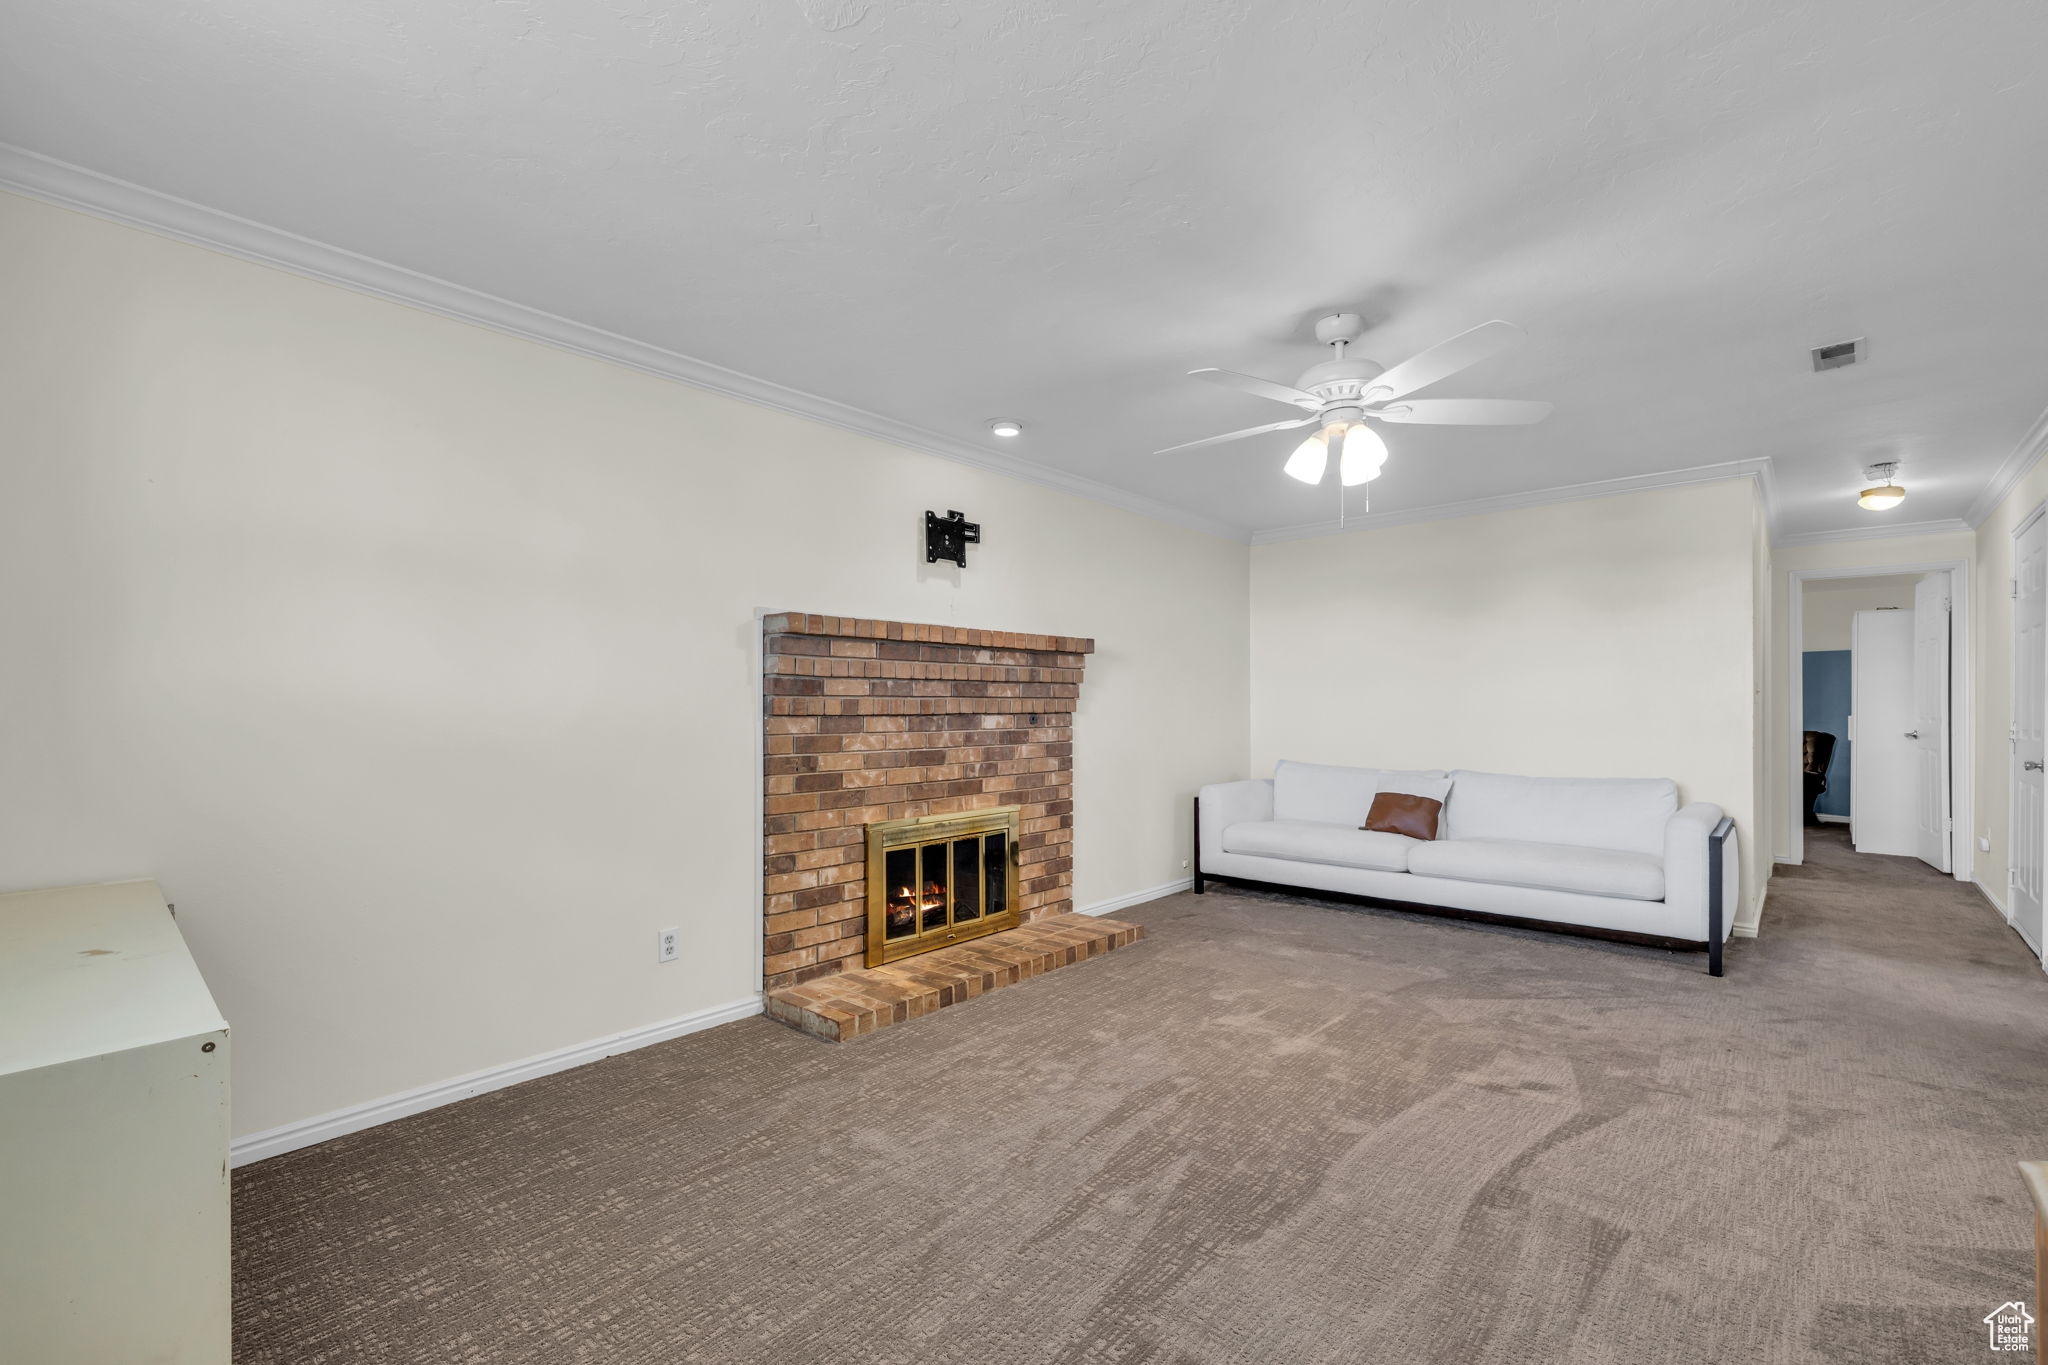 Basement Family Room with gas fireplace